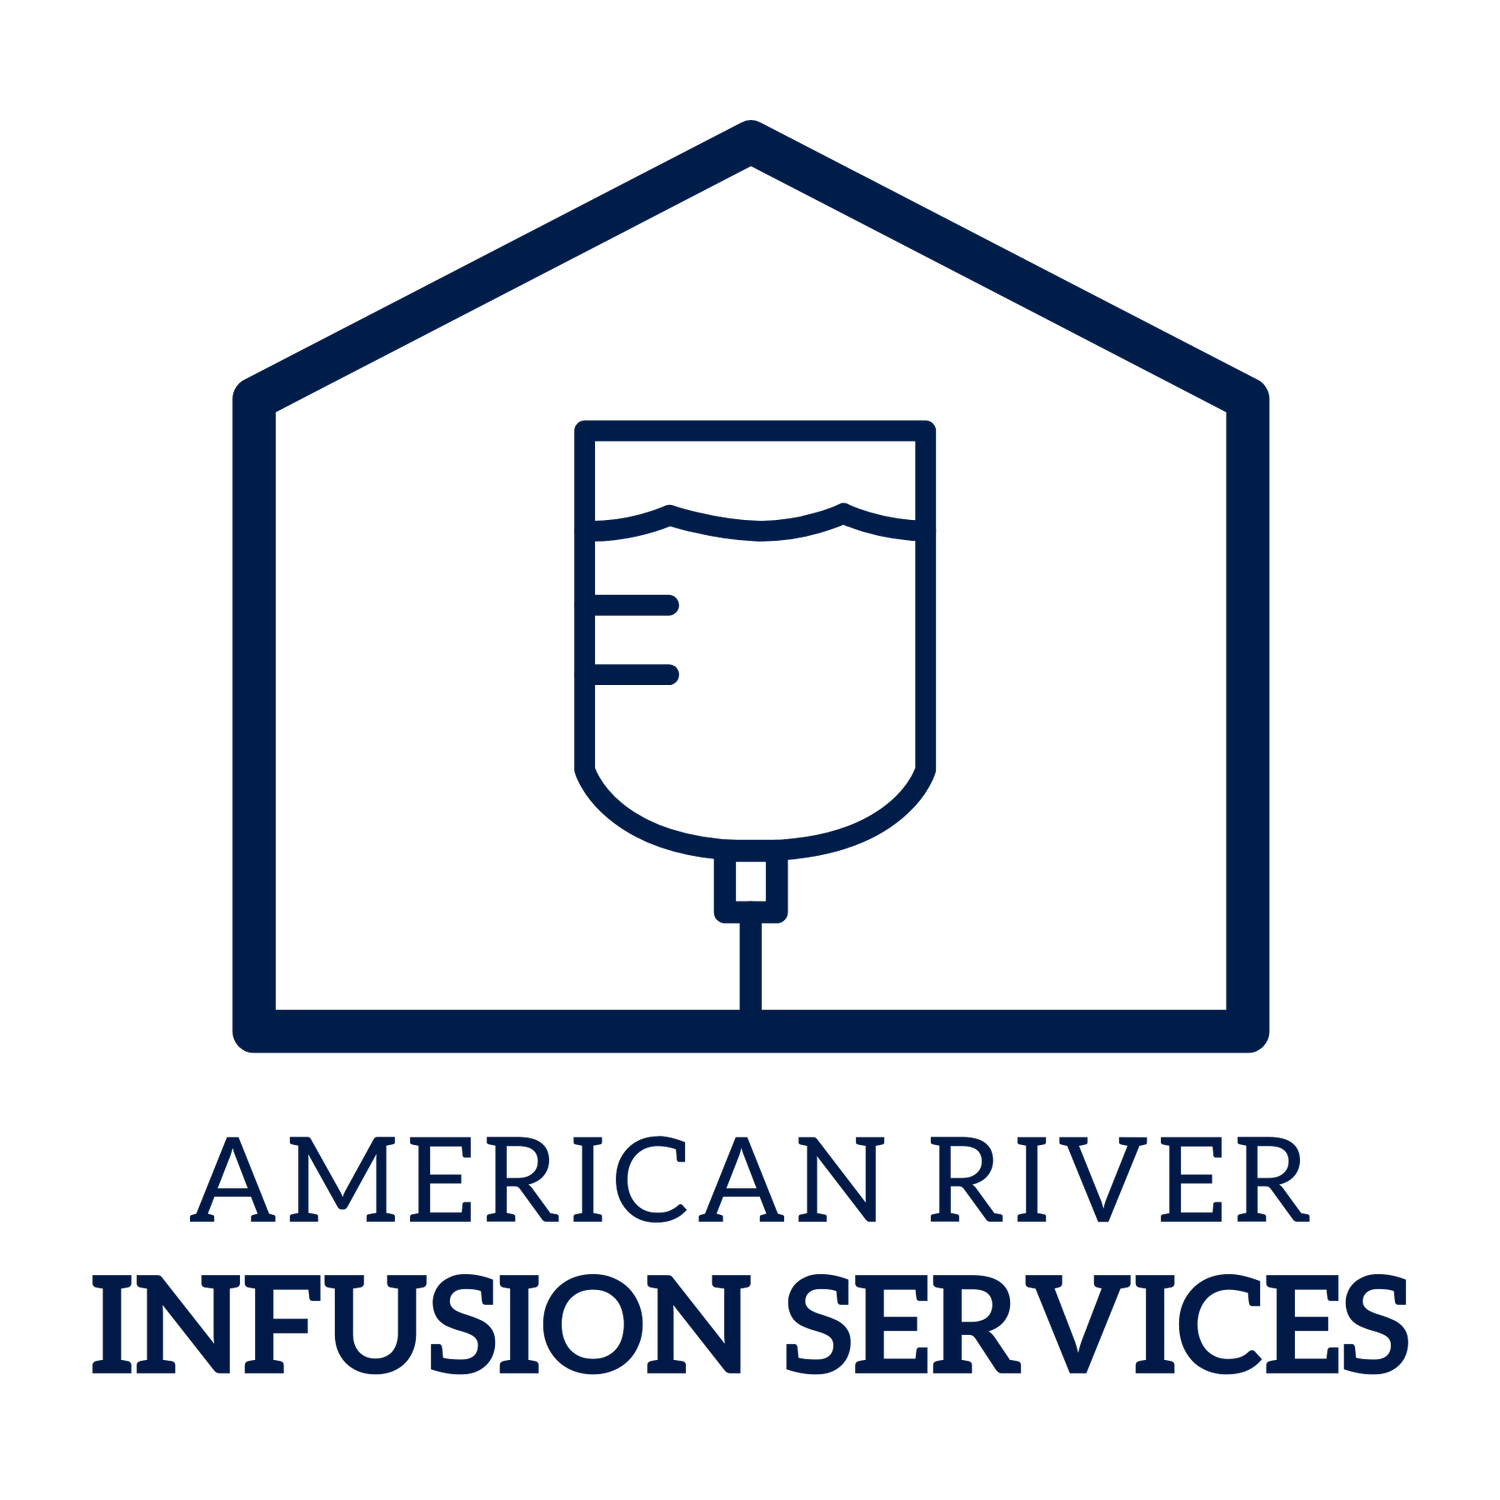 American River Infusion Services